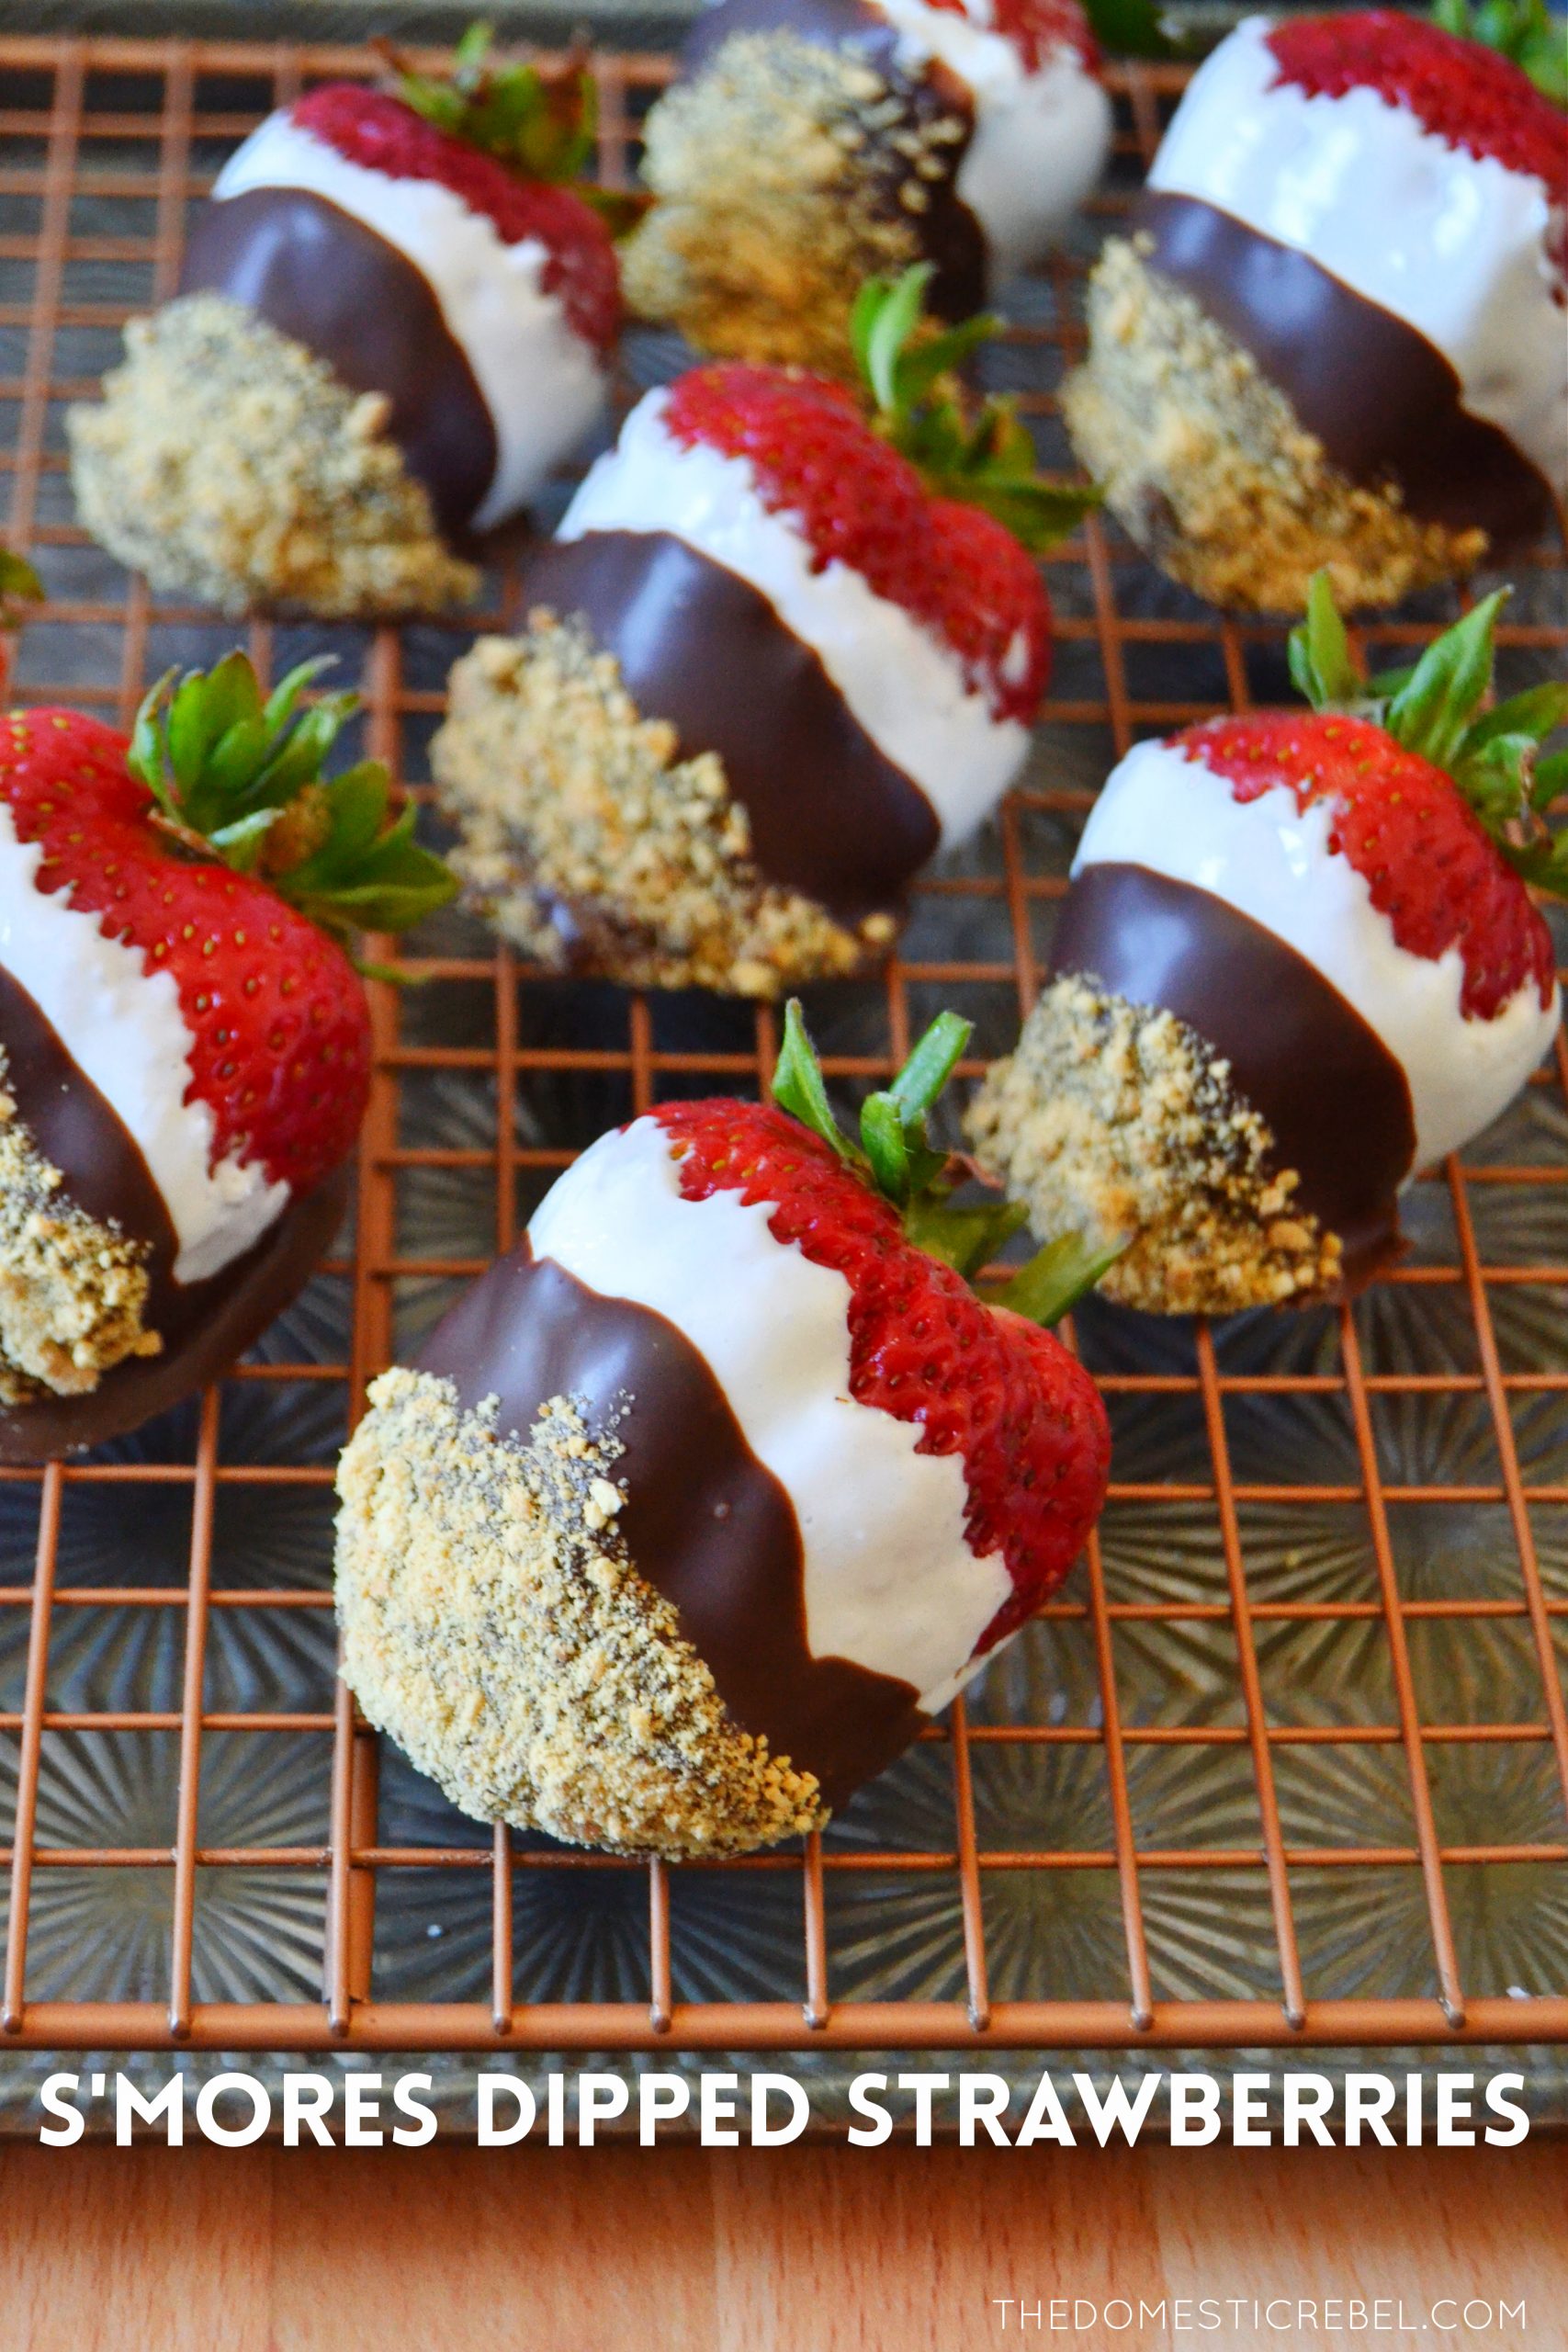 https://thedomesticrebel.com/wp-content/uploads/2021/06/SMORES-DIPPED-STRAWBERRIES-scaled.jpg